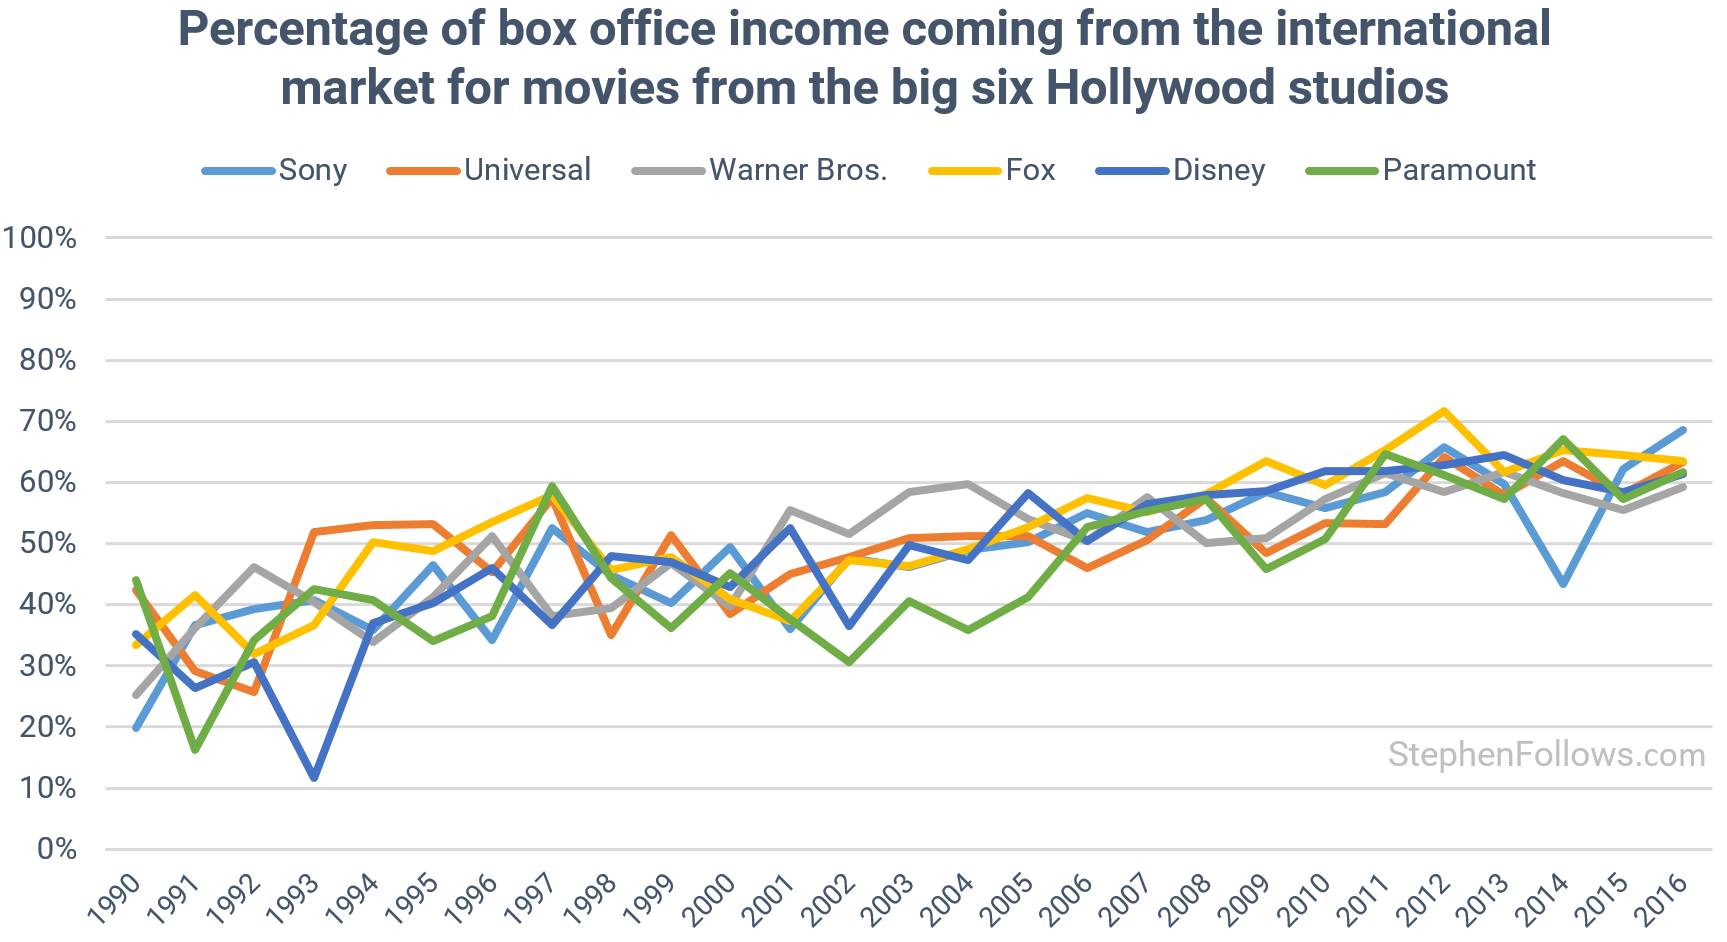 Percentage-of-box-office-income-coming-from-the-international-market-for-movies-from-the-big-six-Hollywood-studios.png